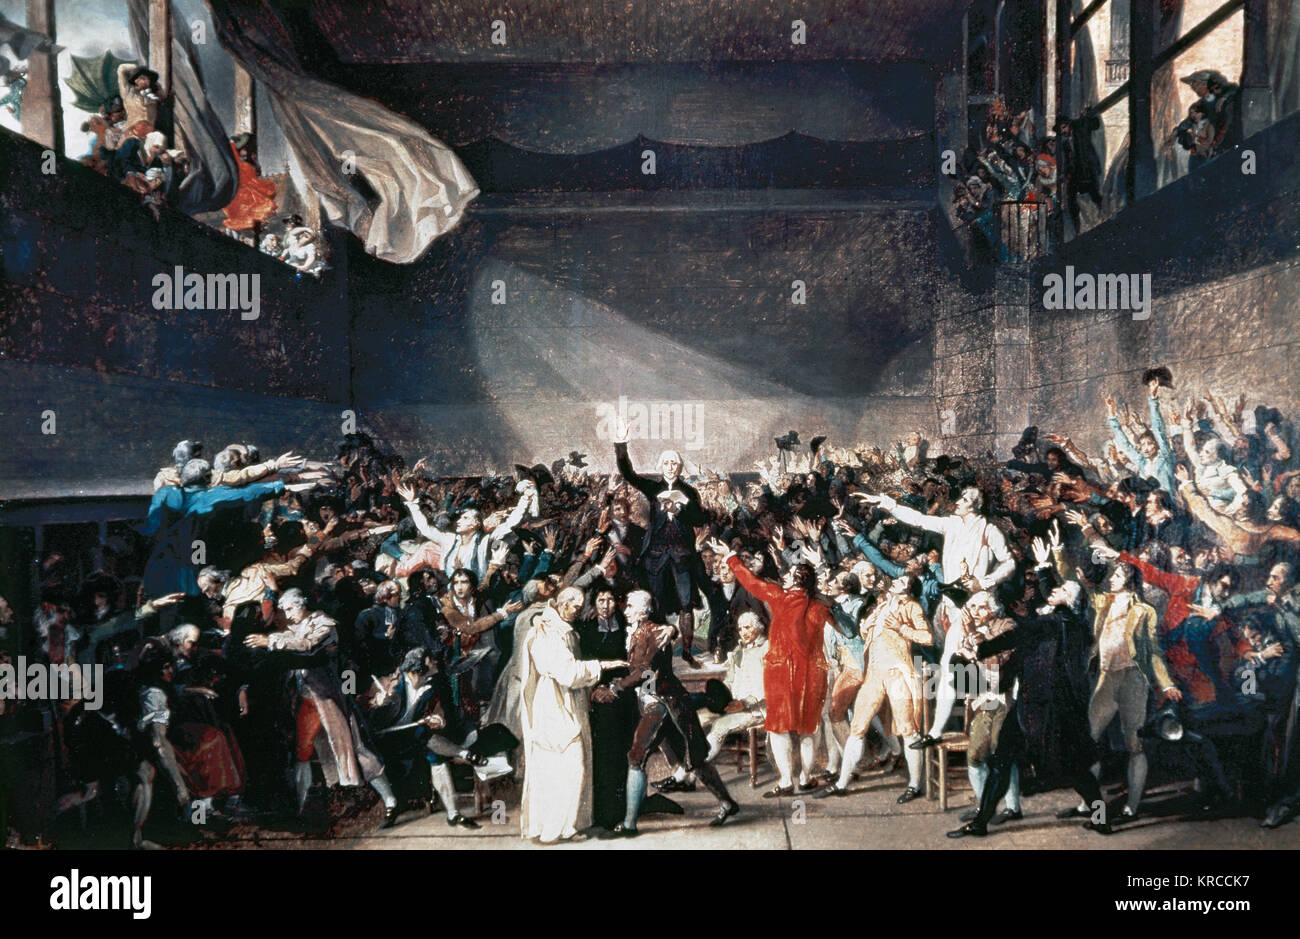 Jacques-Louis David (1748-1825). French painter in the Neoclassical style. French Revolution. The Tennis Court Oath (June 20, 1789). Painting. Carnavalet Museum. Paris. France. Stock Photo